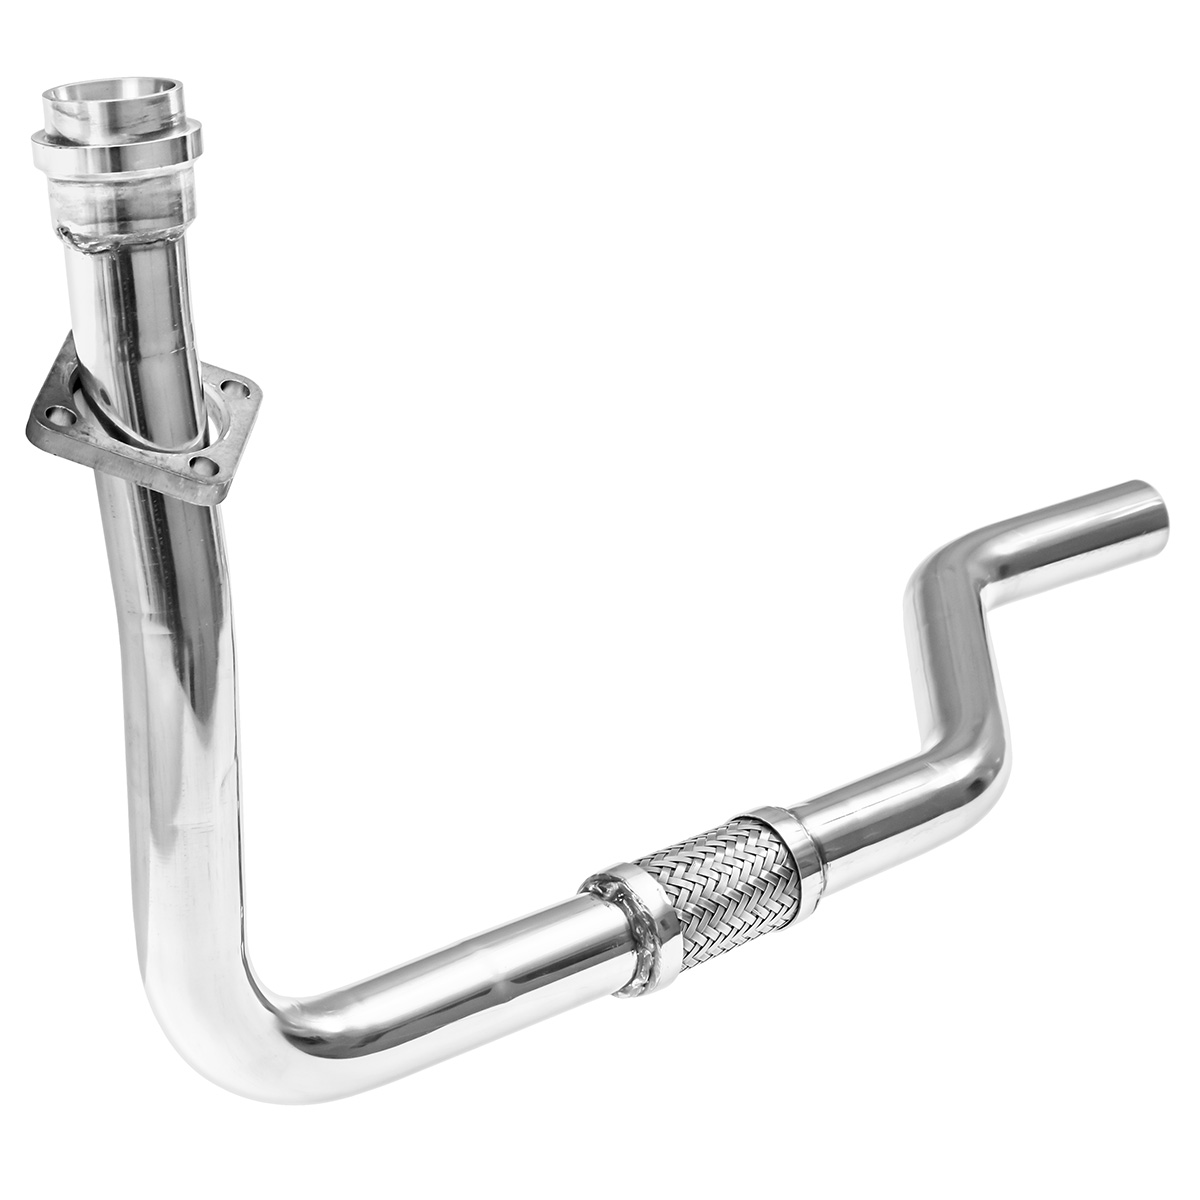 Jaguar E-Type Rear exhaust Downpipe by Double S Exhausts 3.8, 4.2